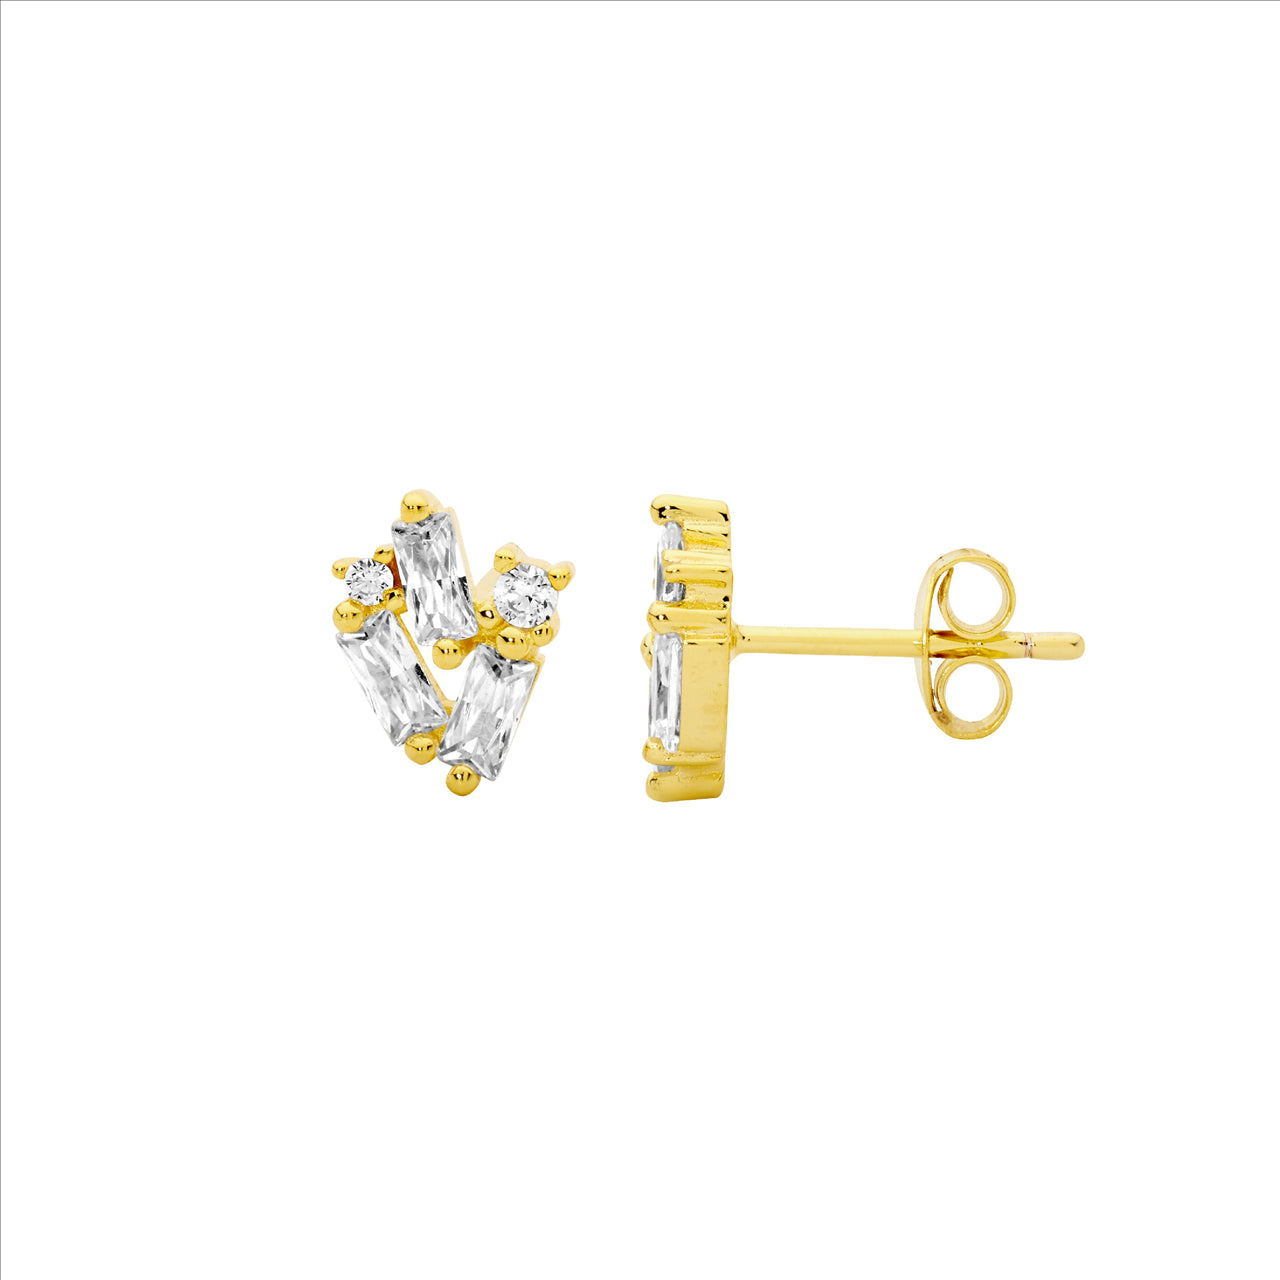 Ellani Stering Silver & Baguette Cut Cubic Zirconia Gold Plated Staggered Stud Earrings